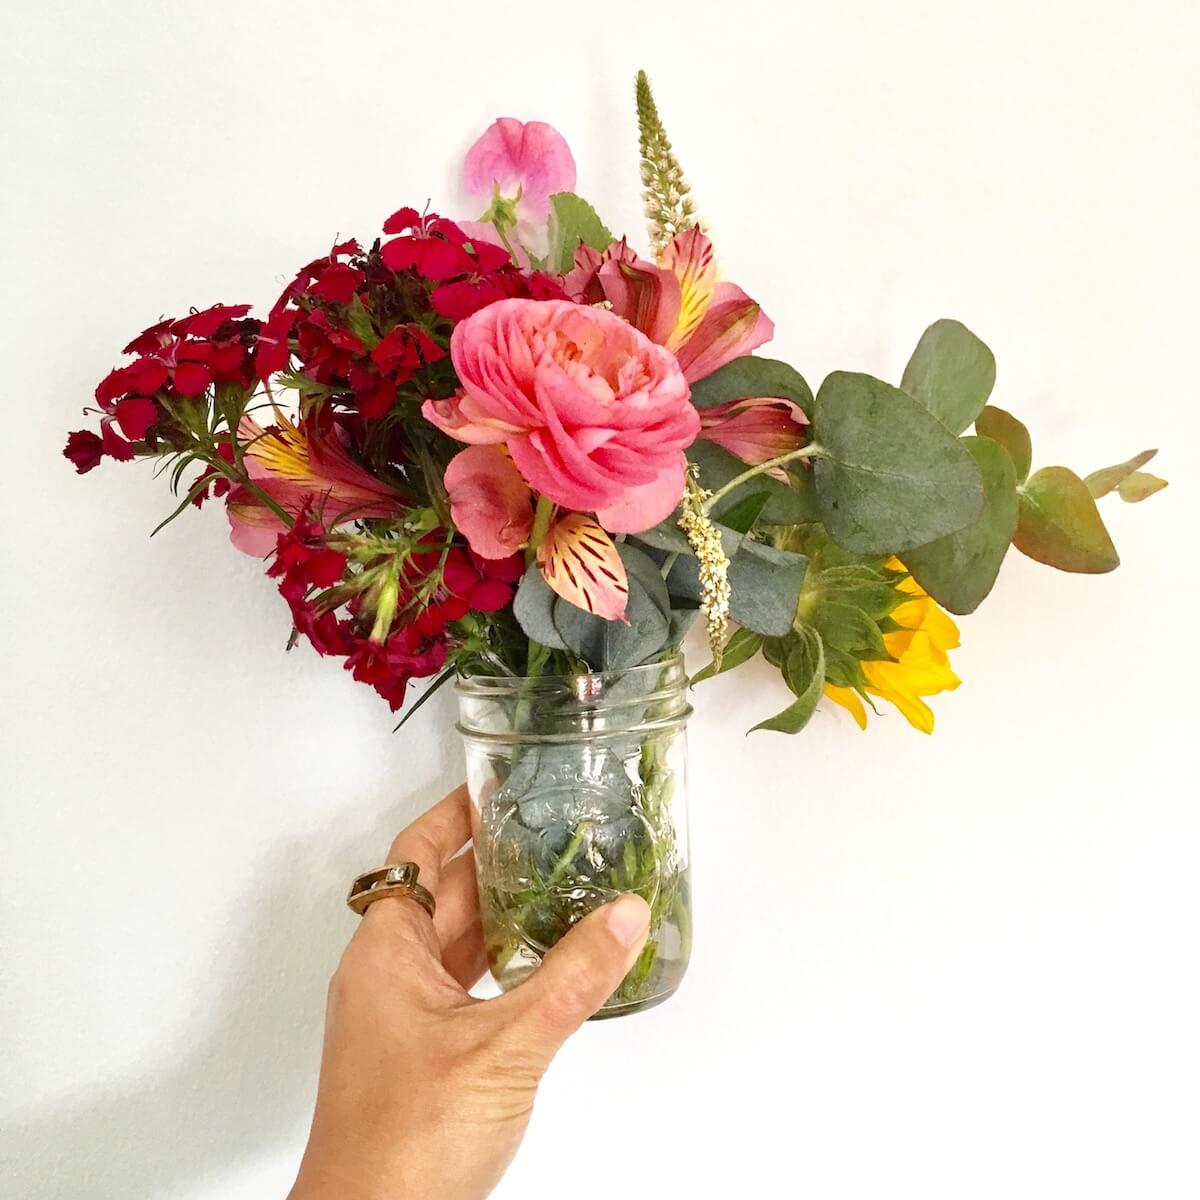 DIY Wedding Flowers: a hand holds a jar with flowers